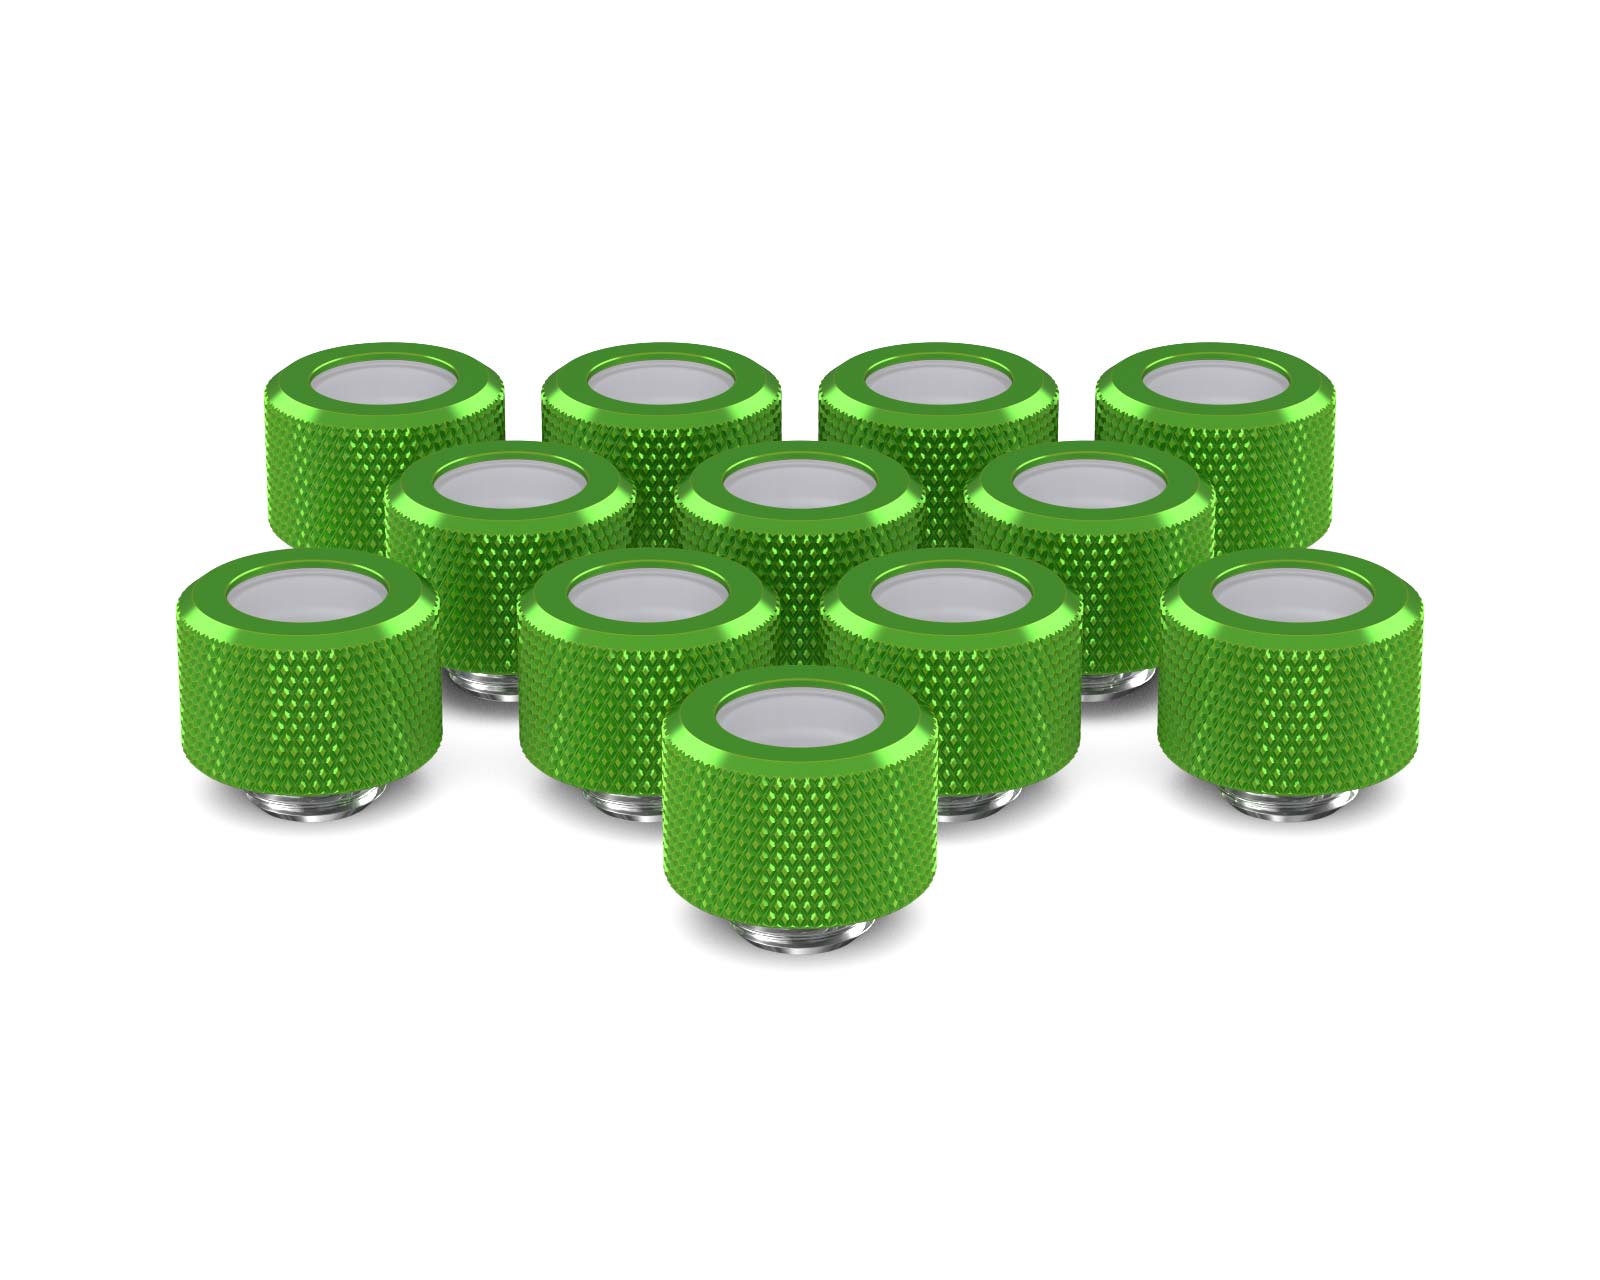 PrimoChill 14mm OD Rigid SX Fitting - 12 Pack - PrimoChill - KEEPING IT COOL Toxic Candy